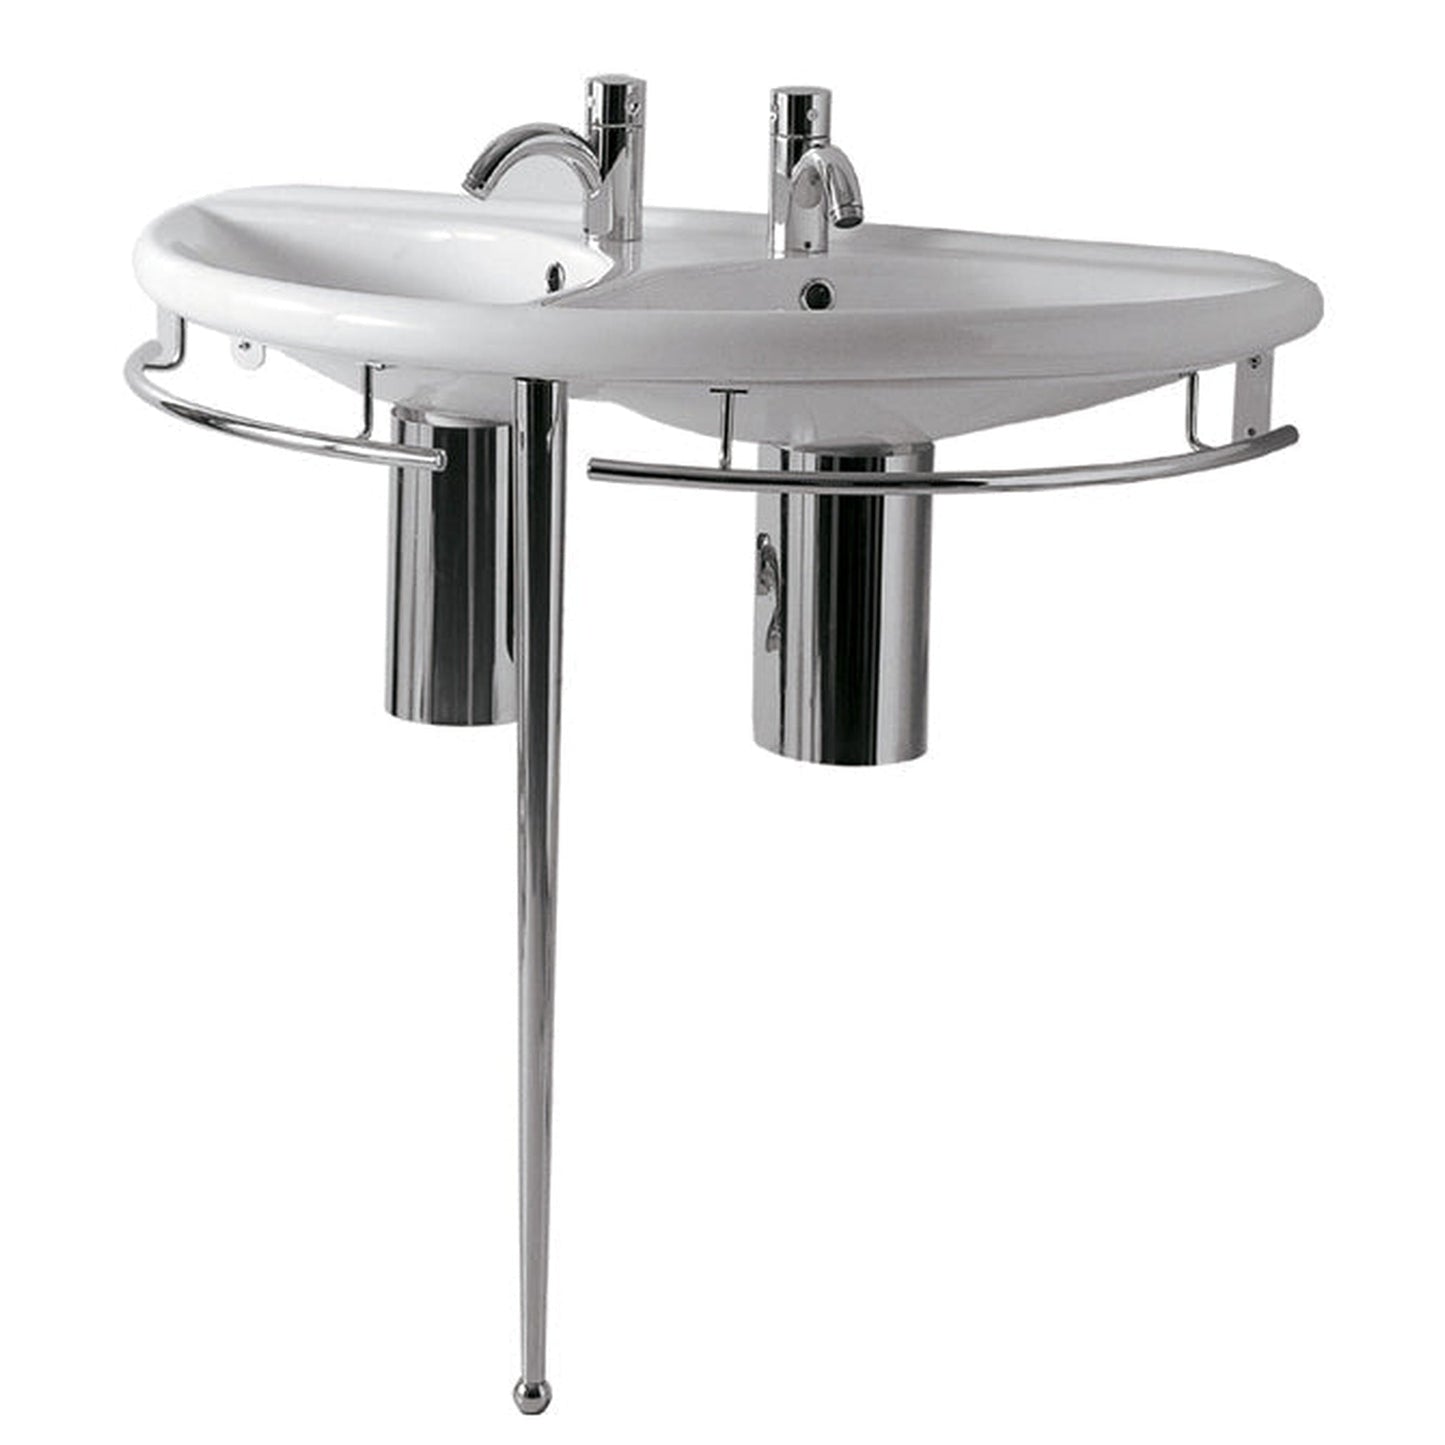 Whitehaus Isabella ECO64-ESU04 White Semi-Circular Double Basin China Console With Chrome Overflow, Polished Chrome Towel Rails and Leg Support